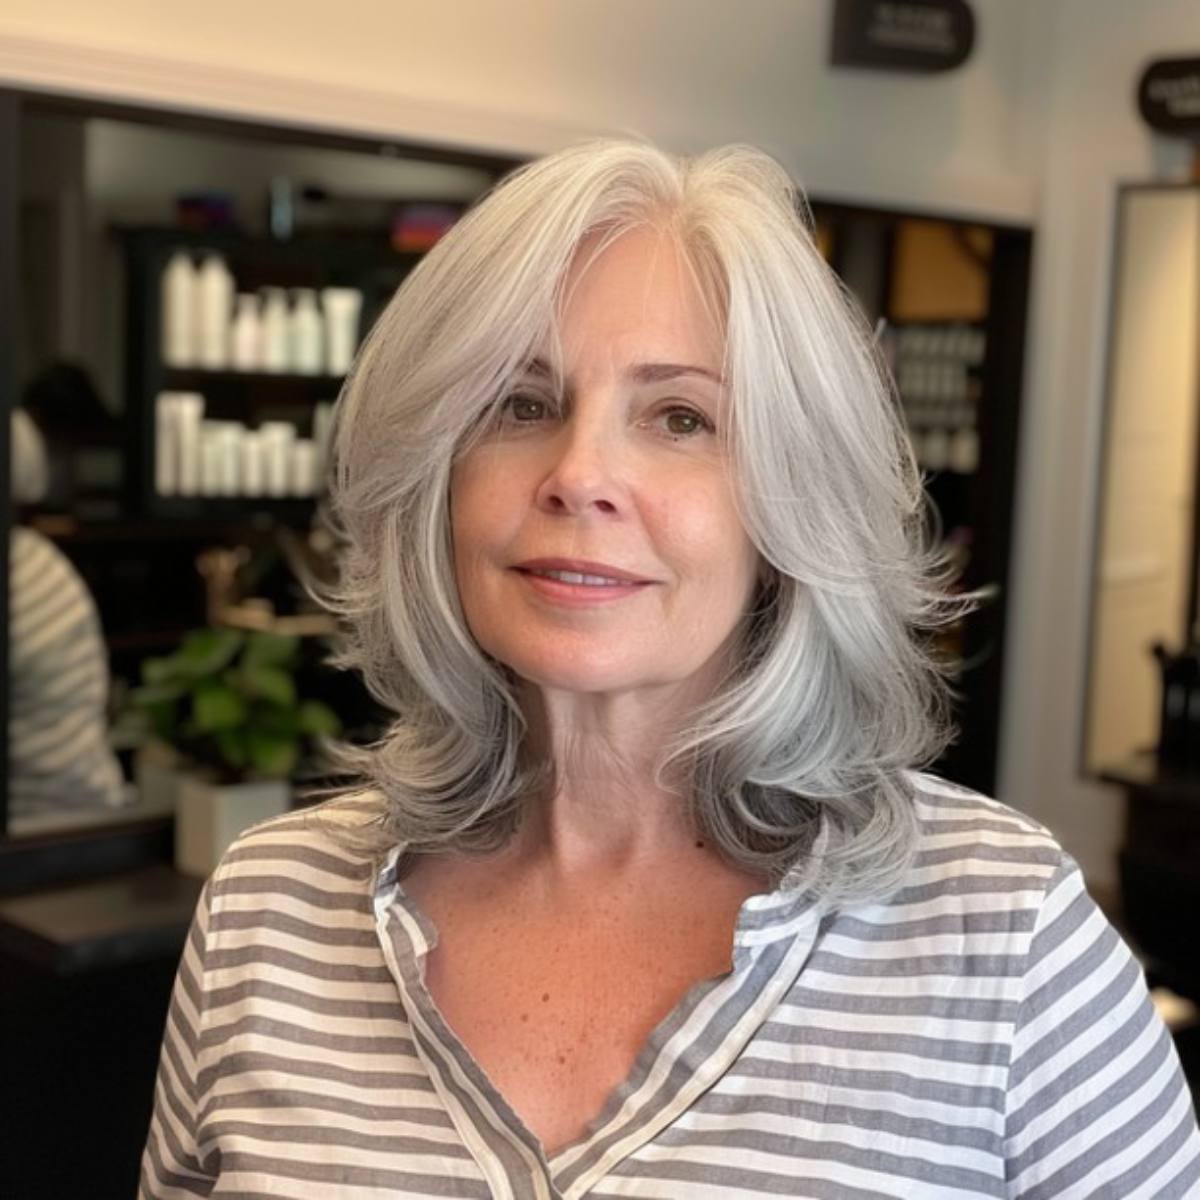 Edgy Classy Mid-Length Chop for Senior Women Over 60